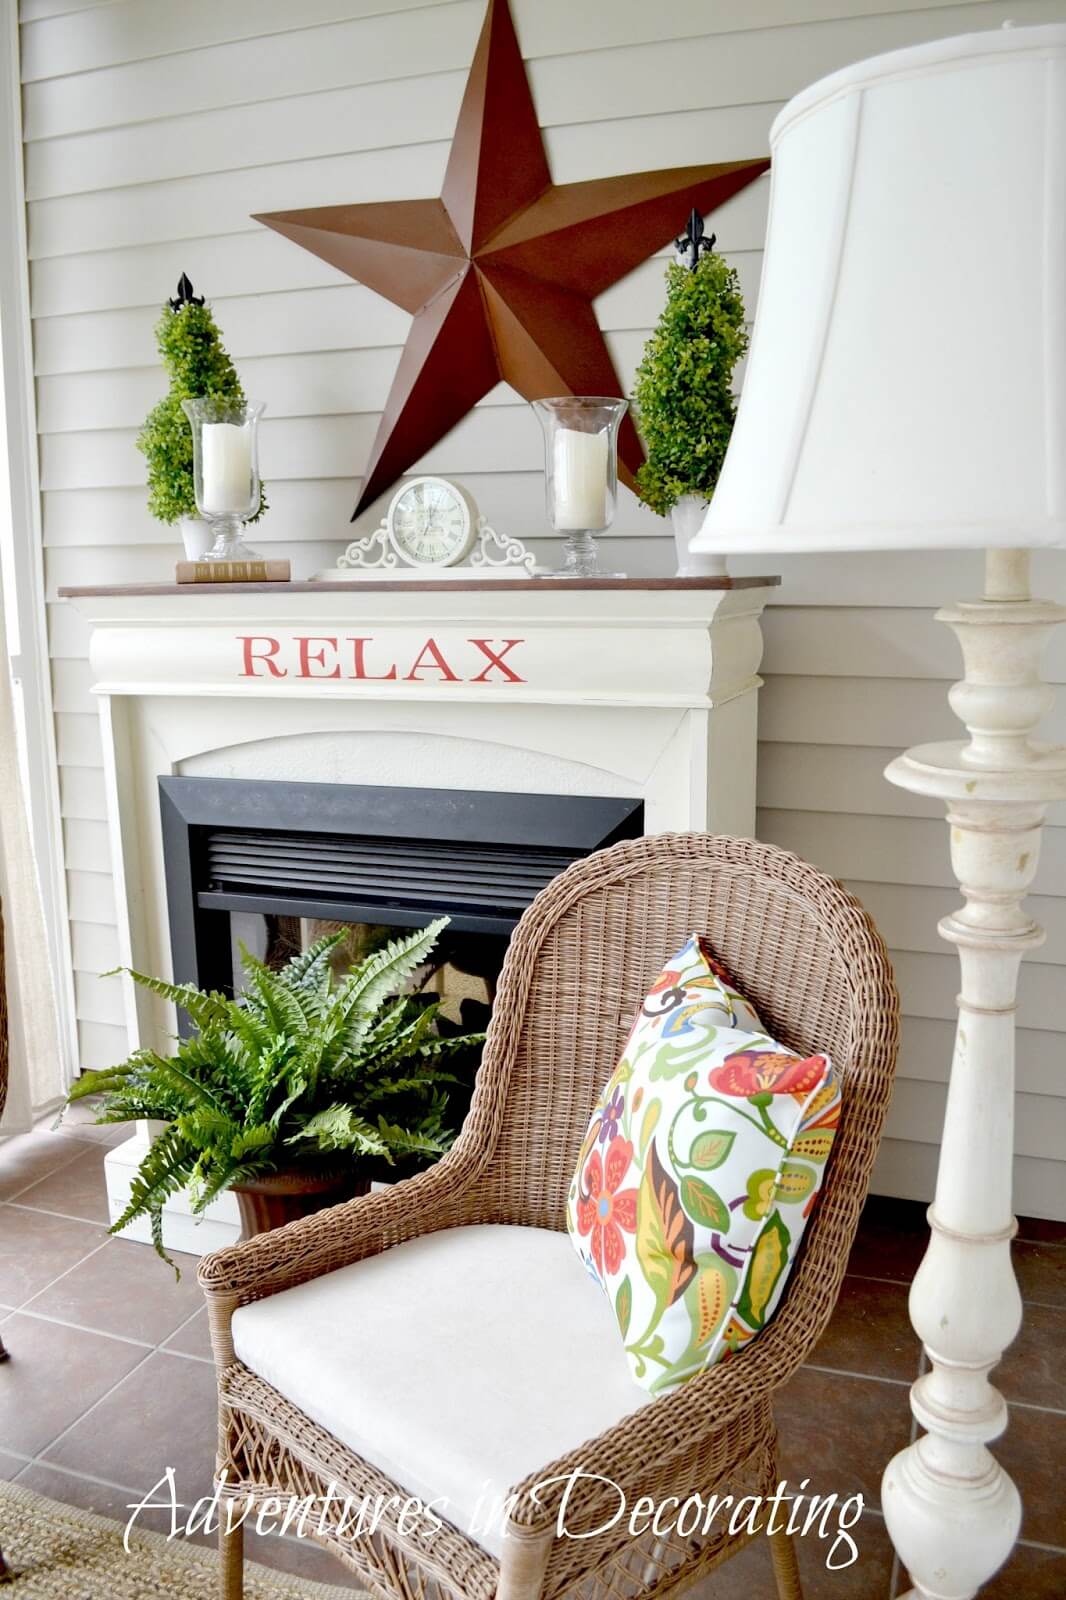 Create Your Own Relaxation with Vinyl Lettering